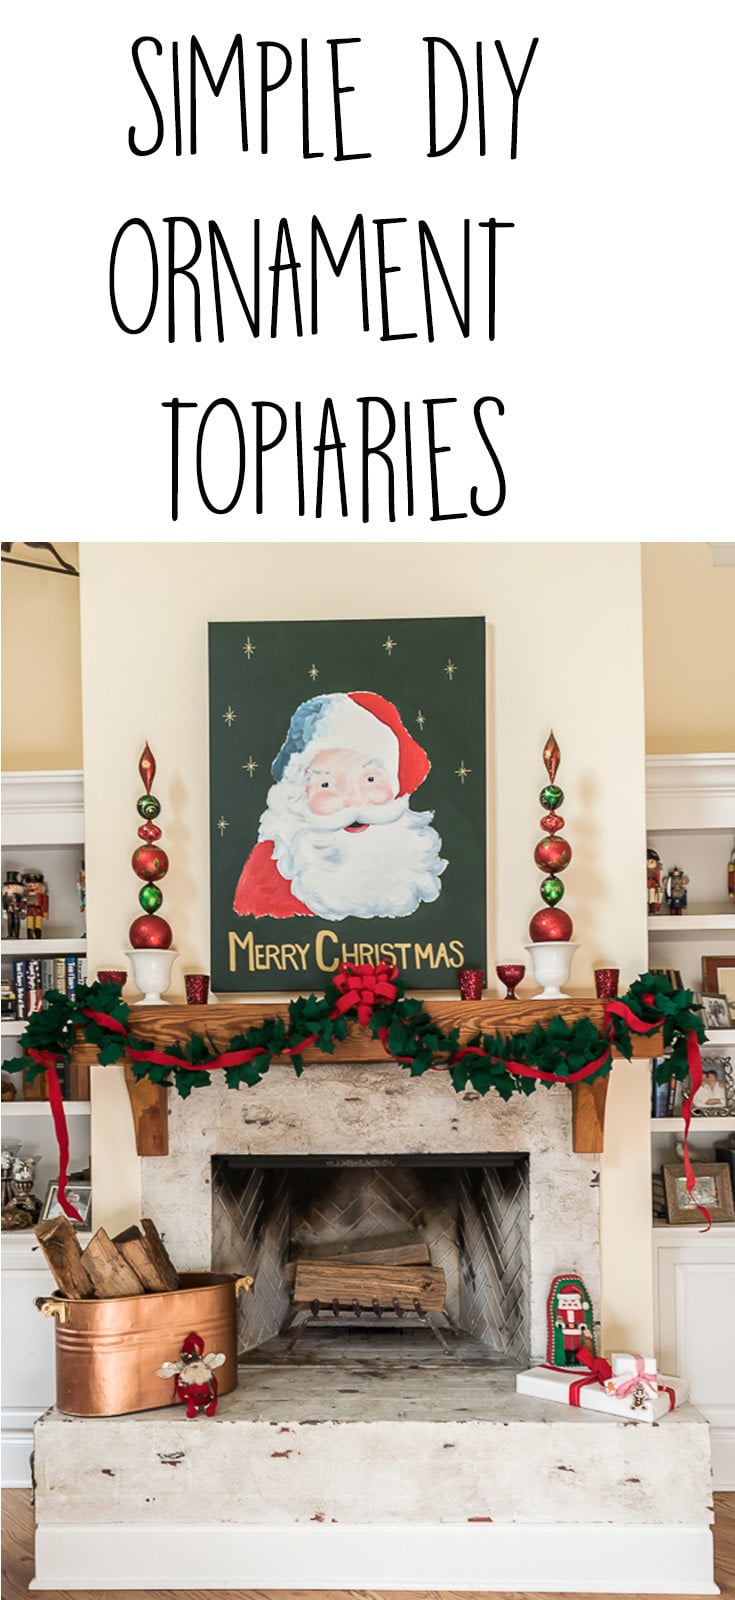 Illustrated instructions on how to make ornament topiaries using inexpensive plastic ornaments, a wood dowel and plaster of paris. Easy Christmas Decor DIY.